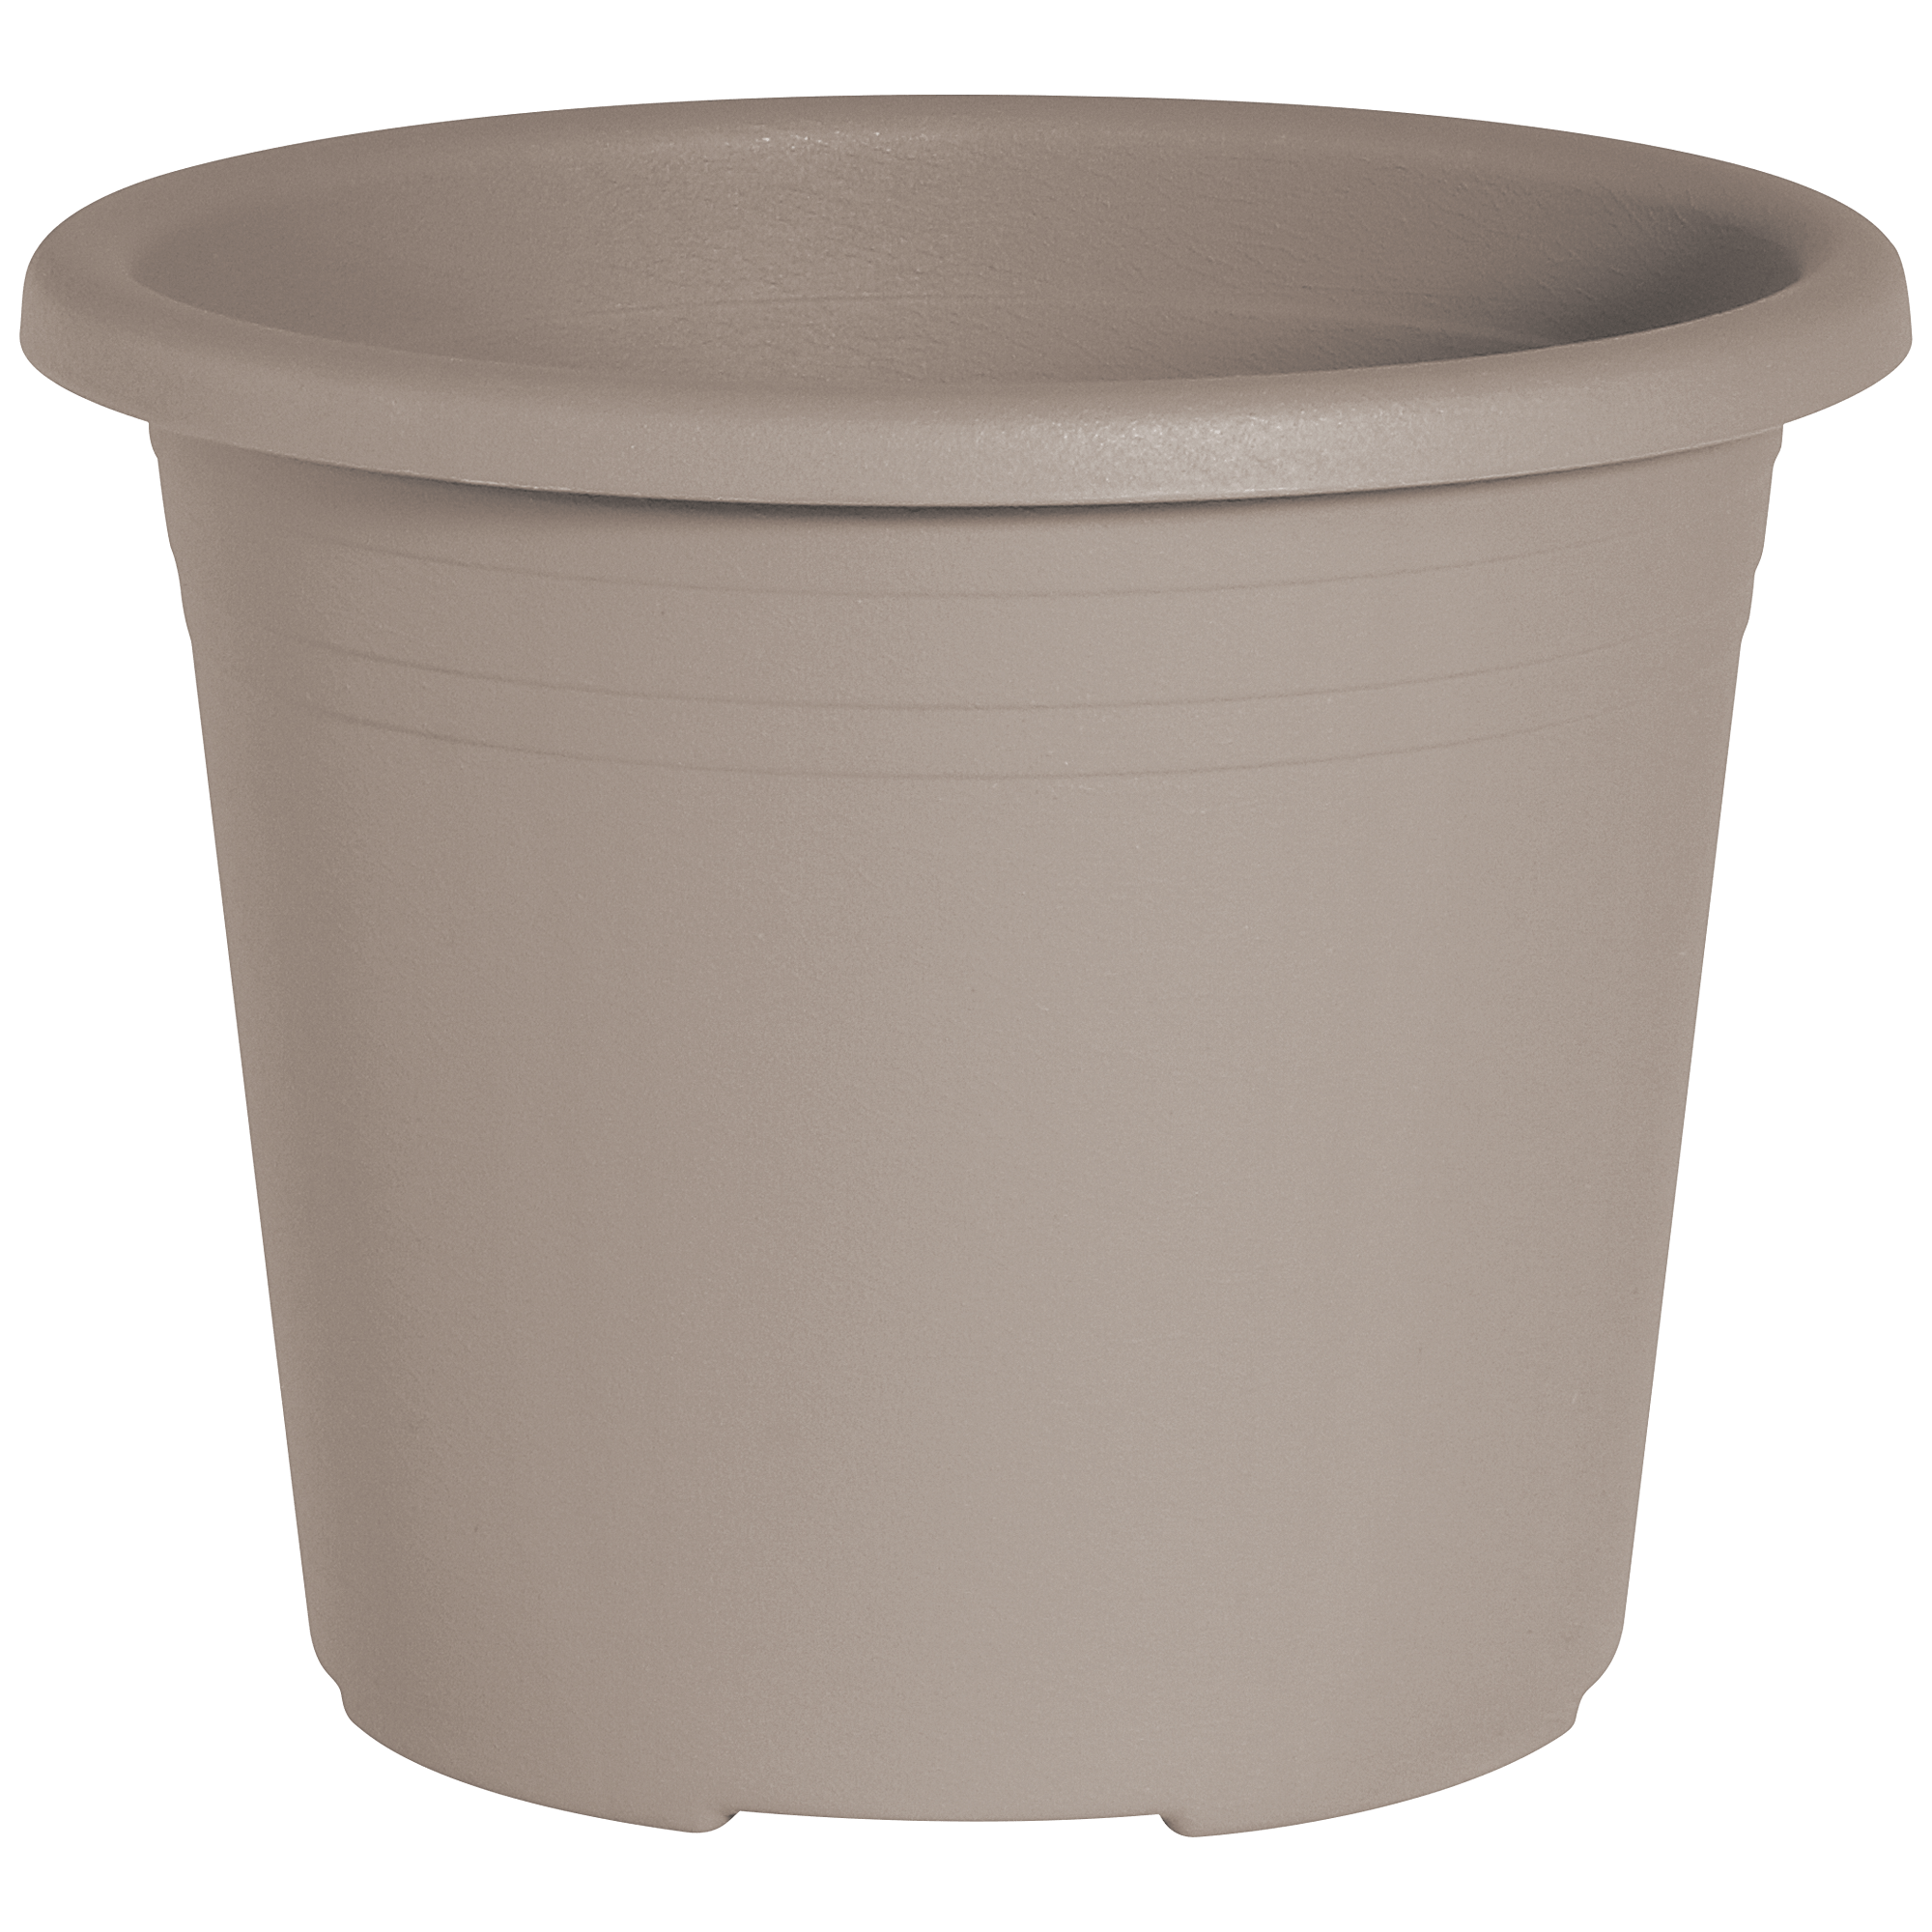 Topf 'Cylindro' taupe Ø 20 cm, 3 Liter + product picture